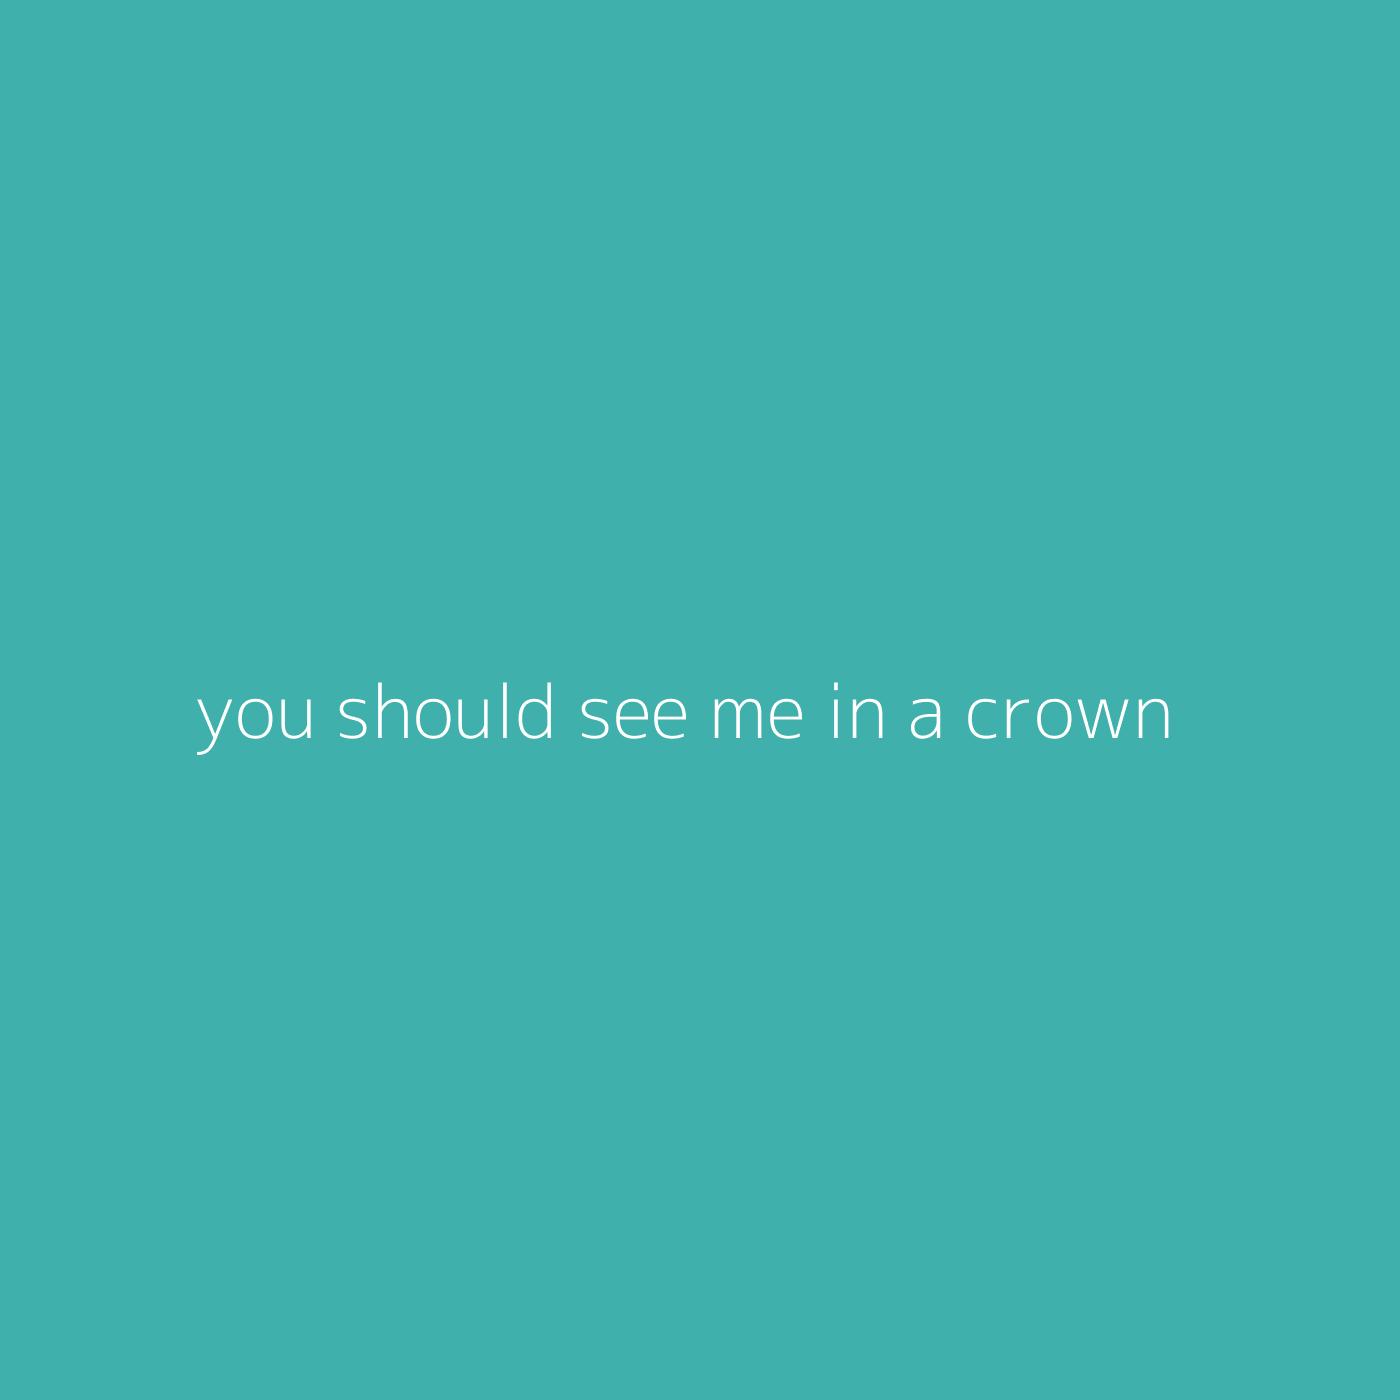 you should see me in a crown – Billie Eilish